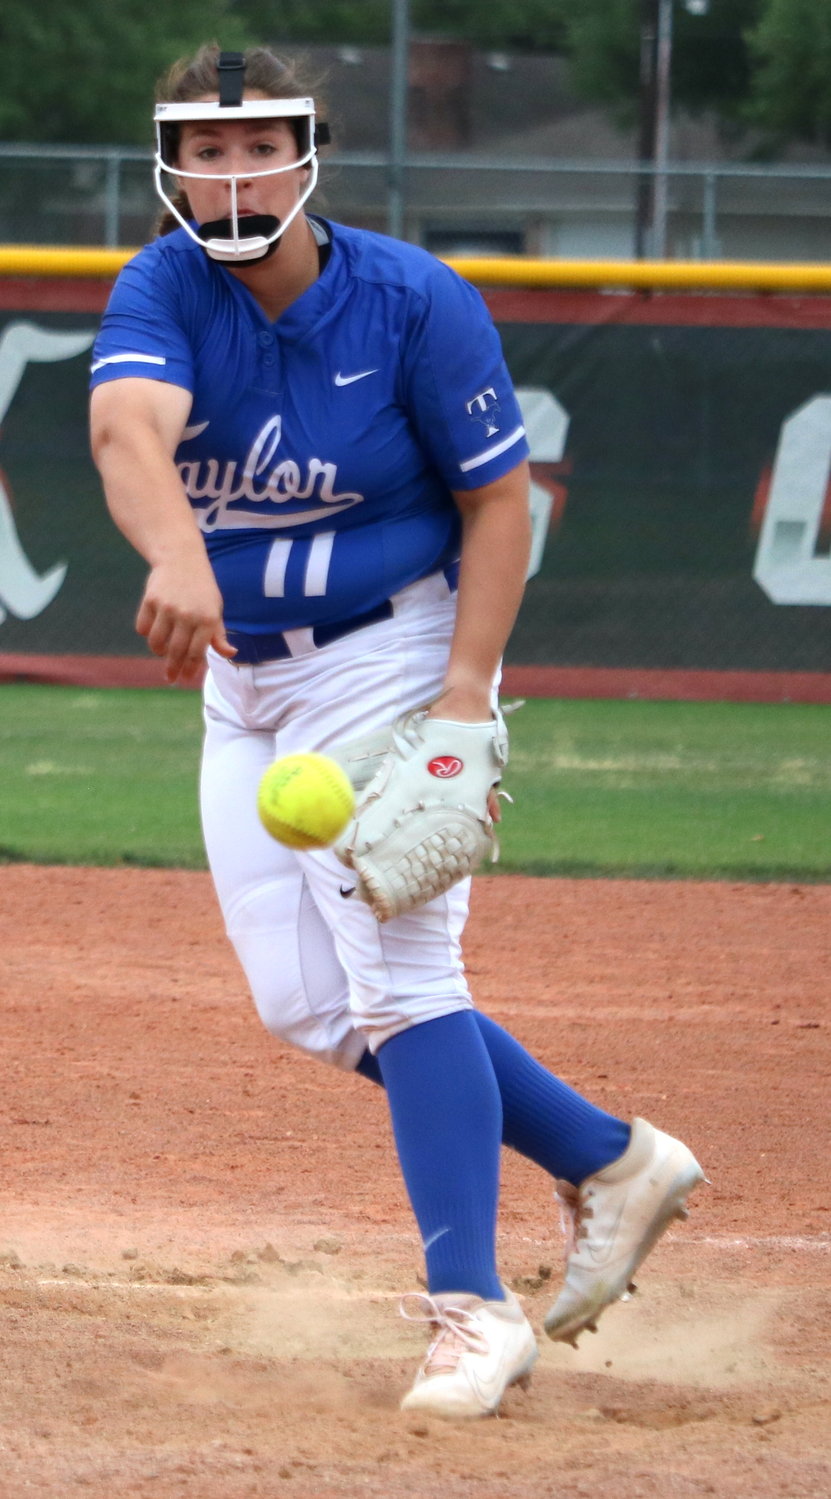 Ariana Hughes pitches during Tuesday’s game between Katy and Taylor at the Katy softball field.